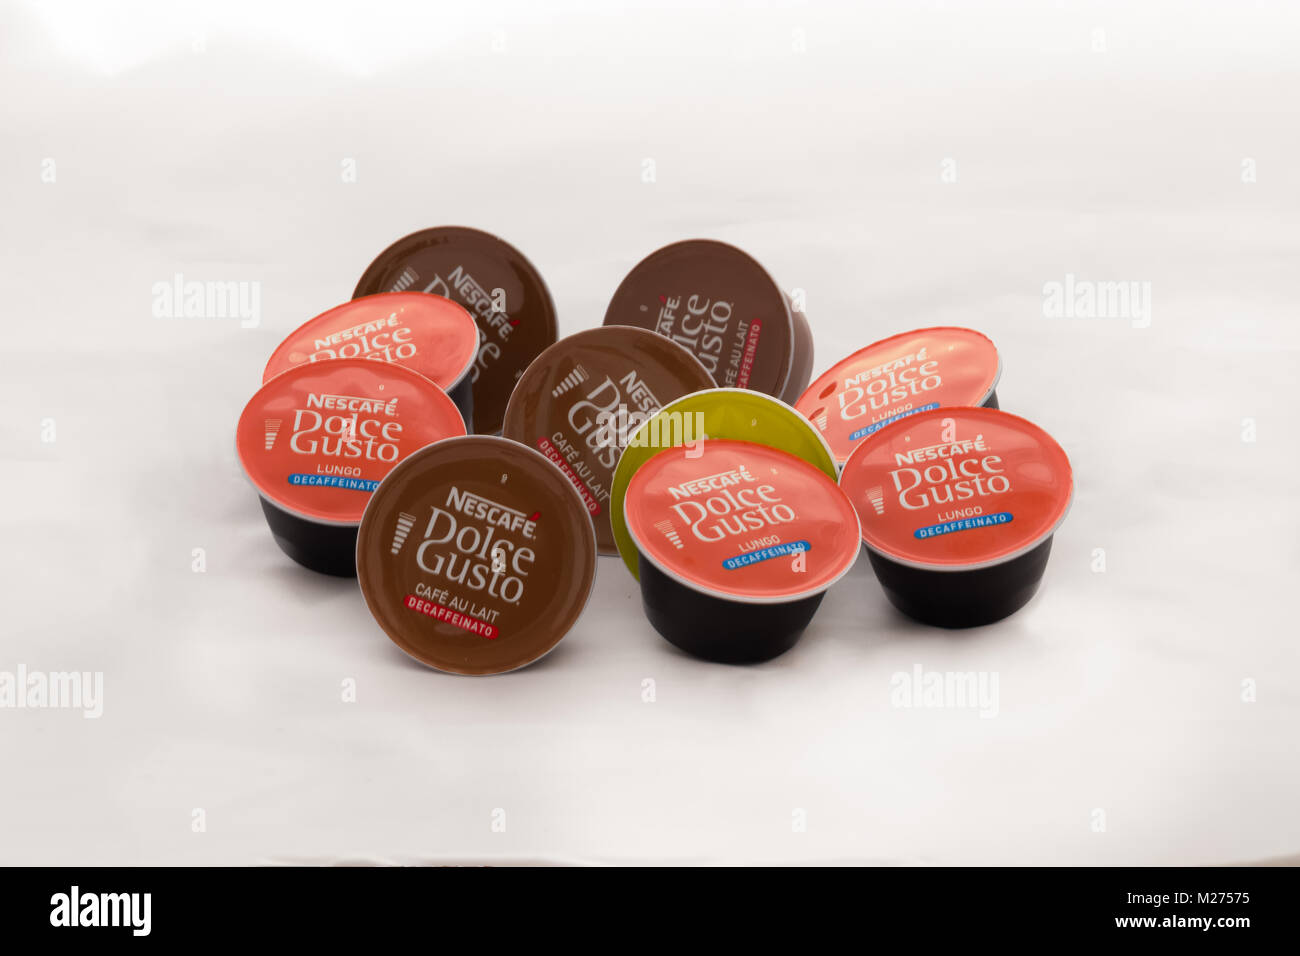 Largs, Scotland, UK - February 03, 2018: An assortment of ten nescafe Dolci Gusto Refills for the ever popular machine of the same name. Isolated on a Stock Photo